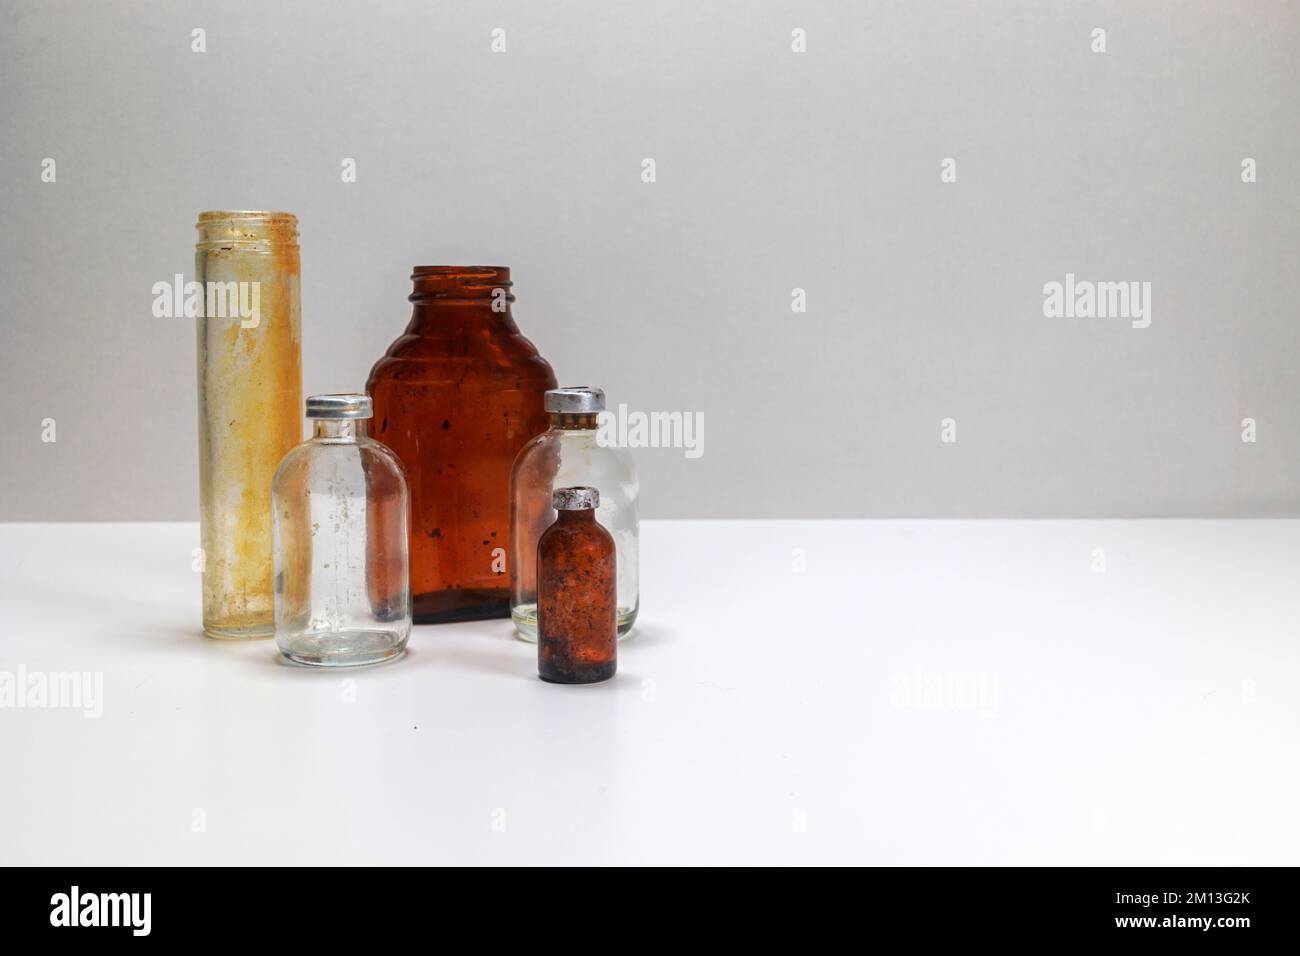 One glass test tube, one amber glass medical pill bottle, two clear glass vaccine bottles, and one small amber vaccine bottle on a white back ground. Stock Photo